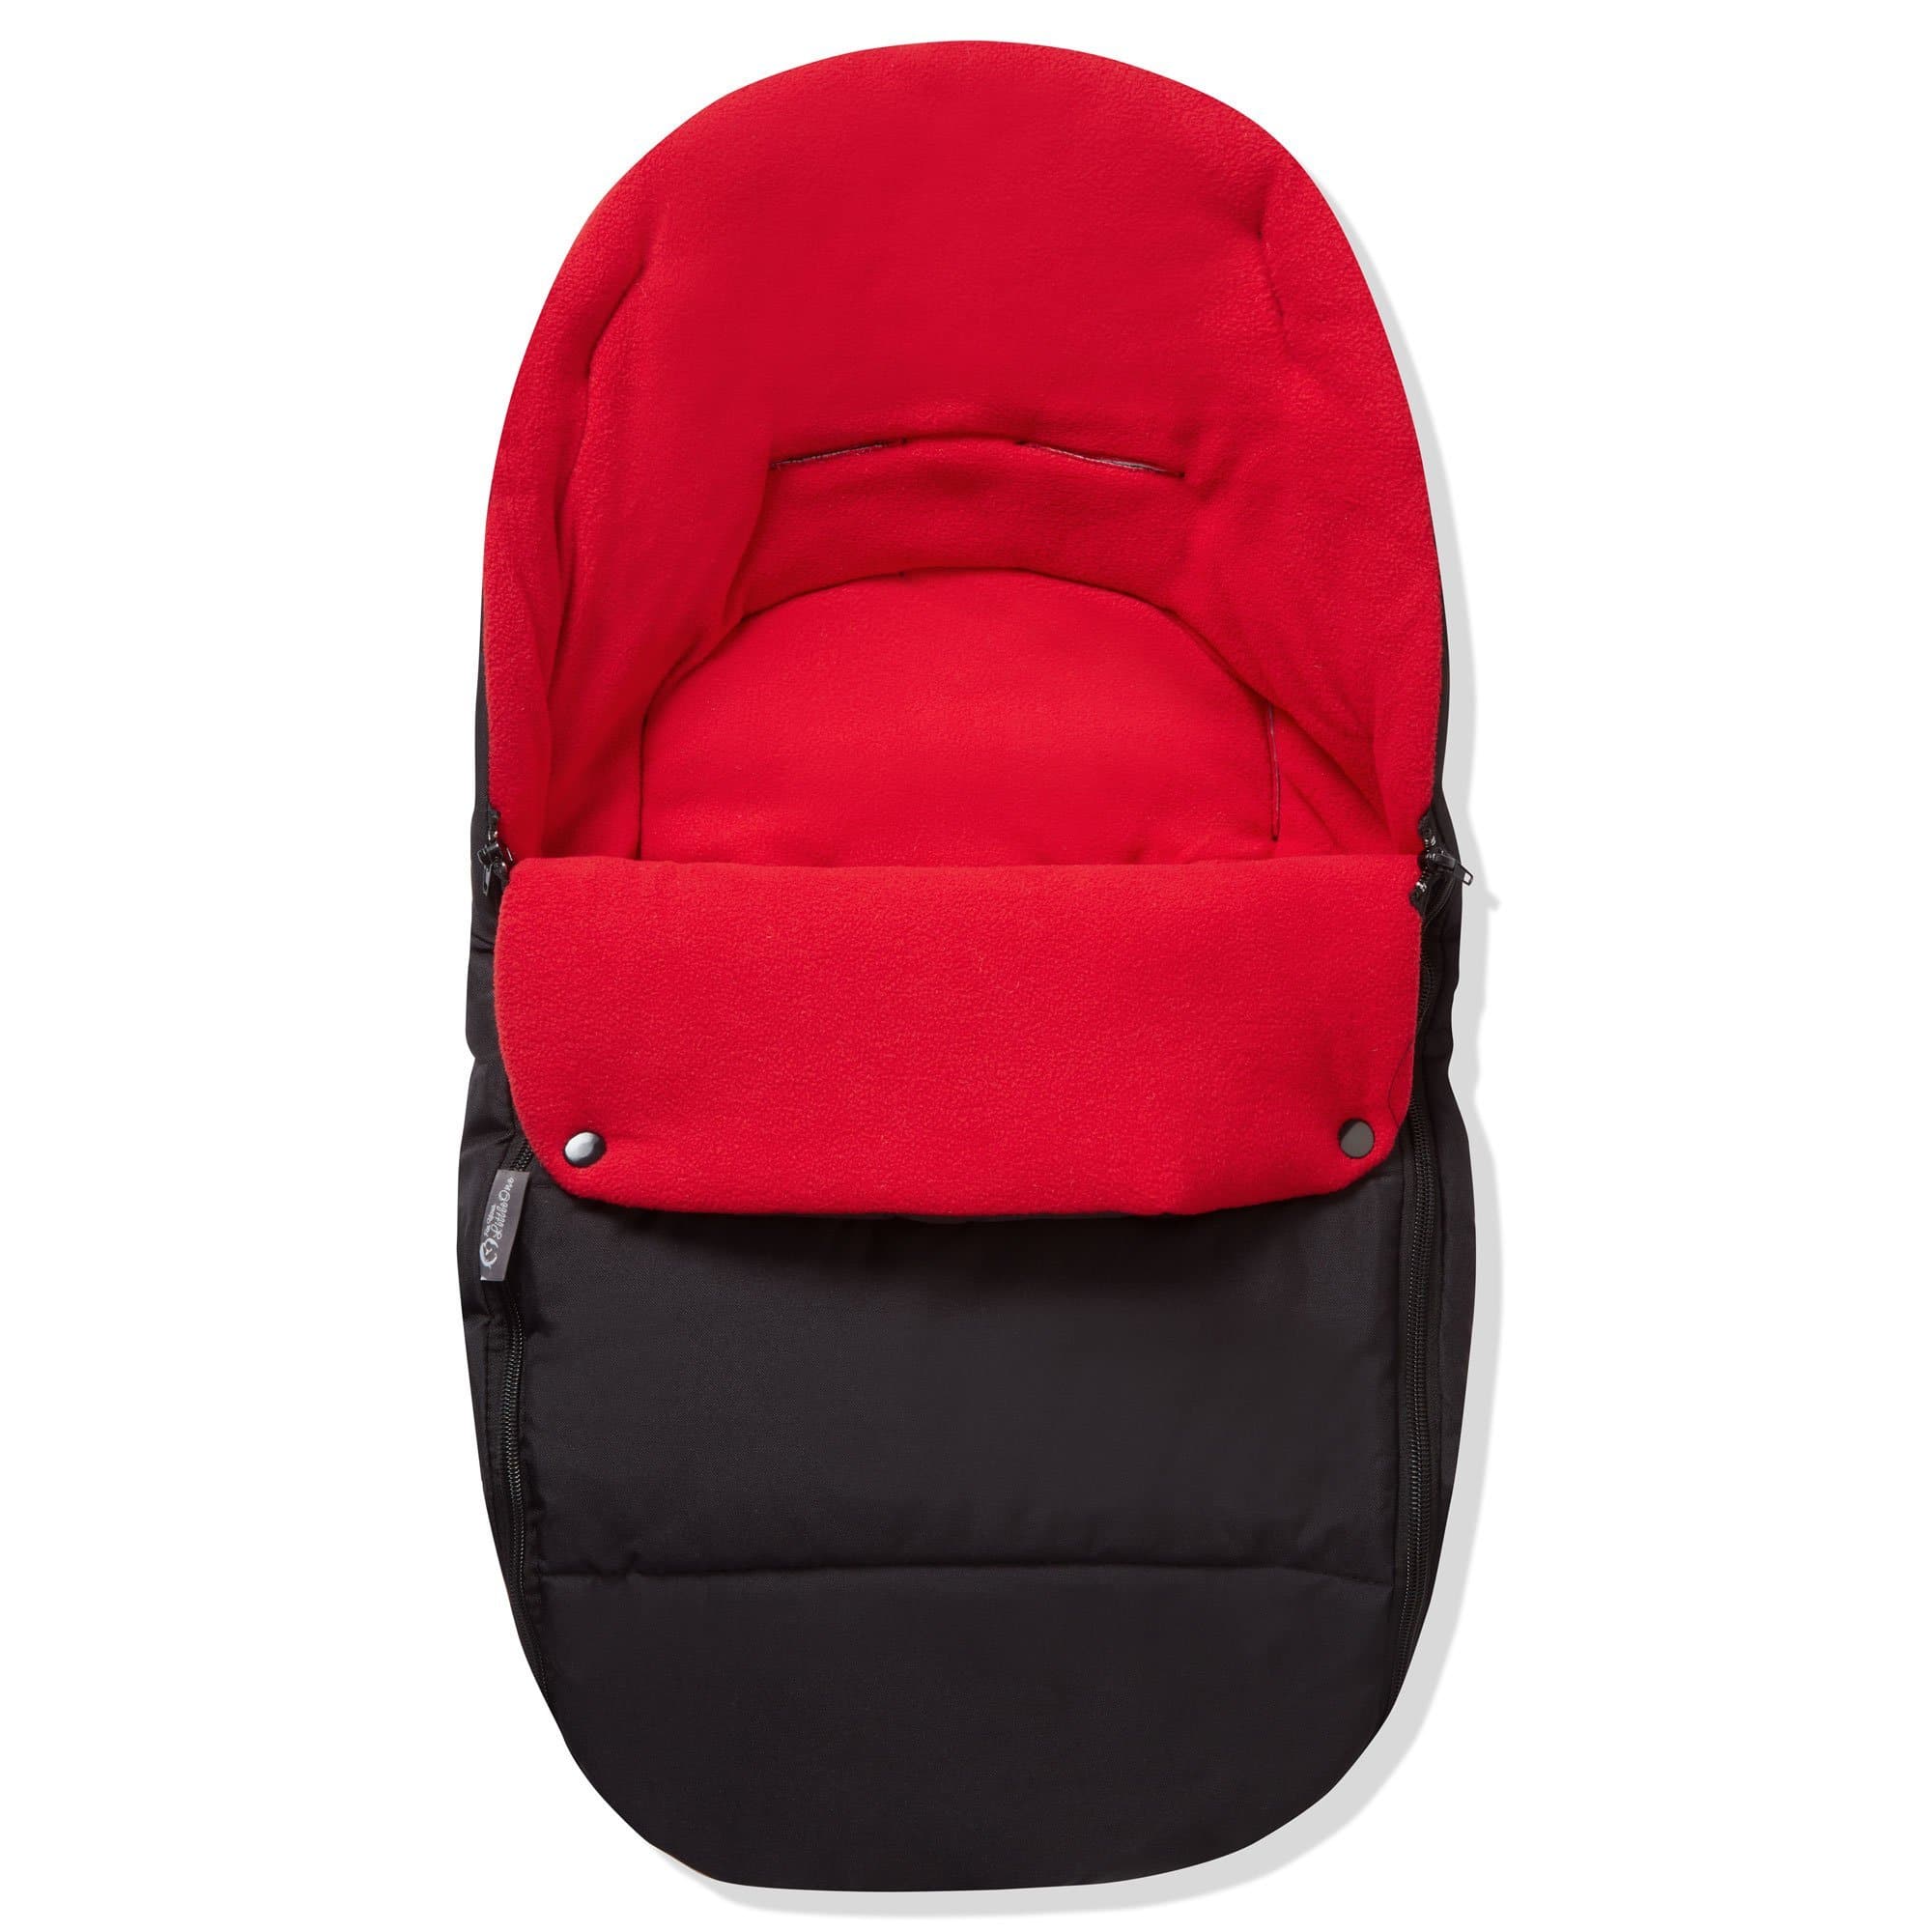 Premium Car Seat Footmuff / Cosy Toes Compatible With Hauck - Fire Red / Fits All Models | For Your Little One